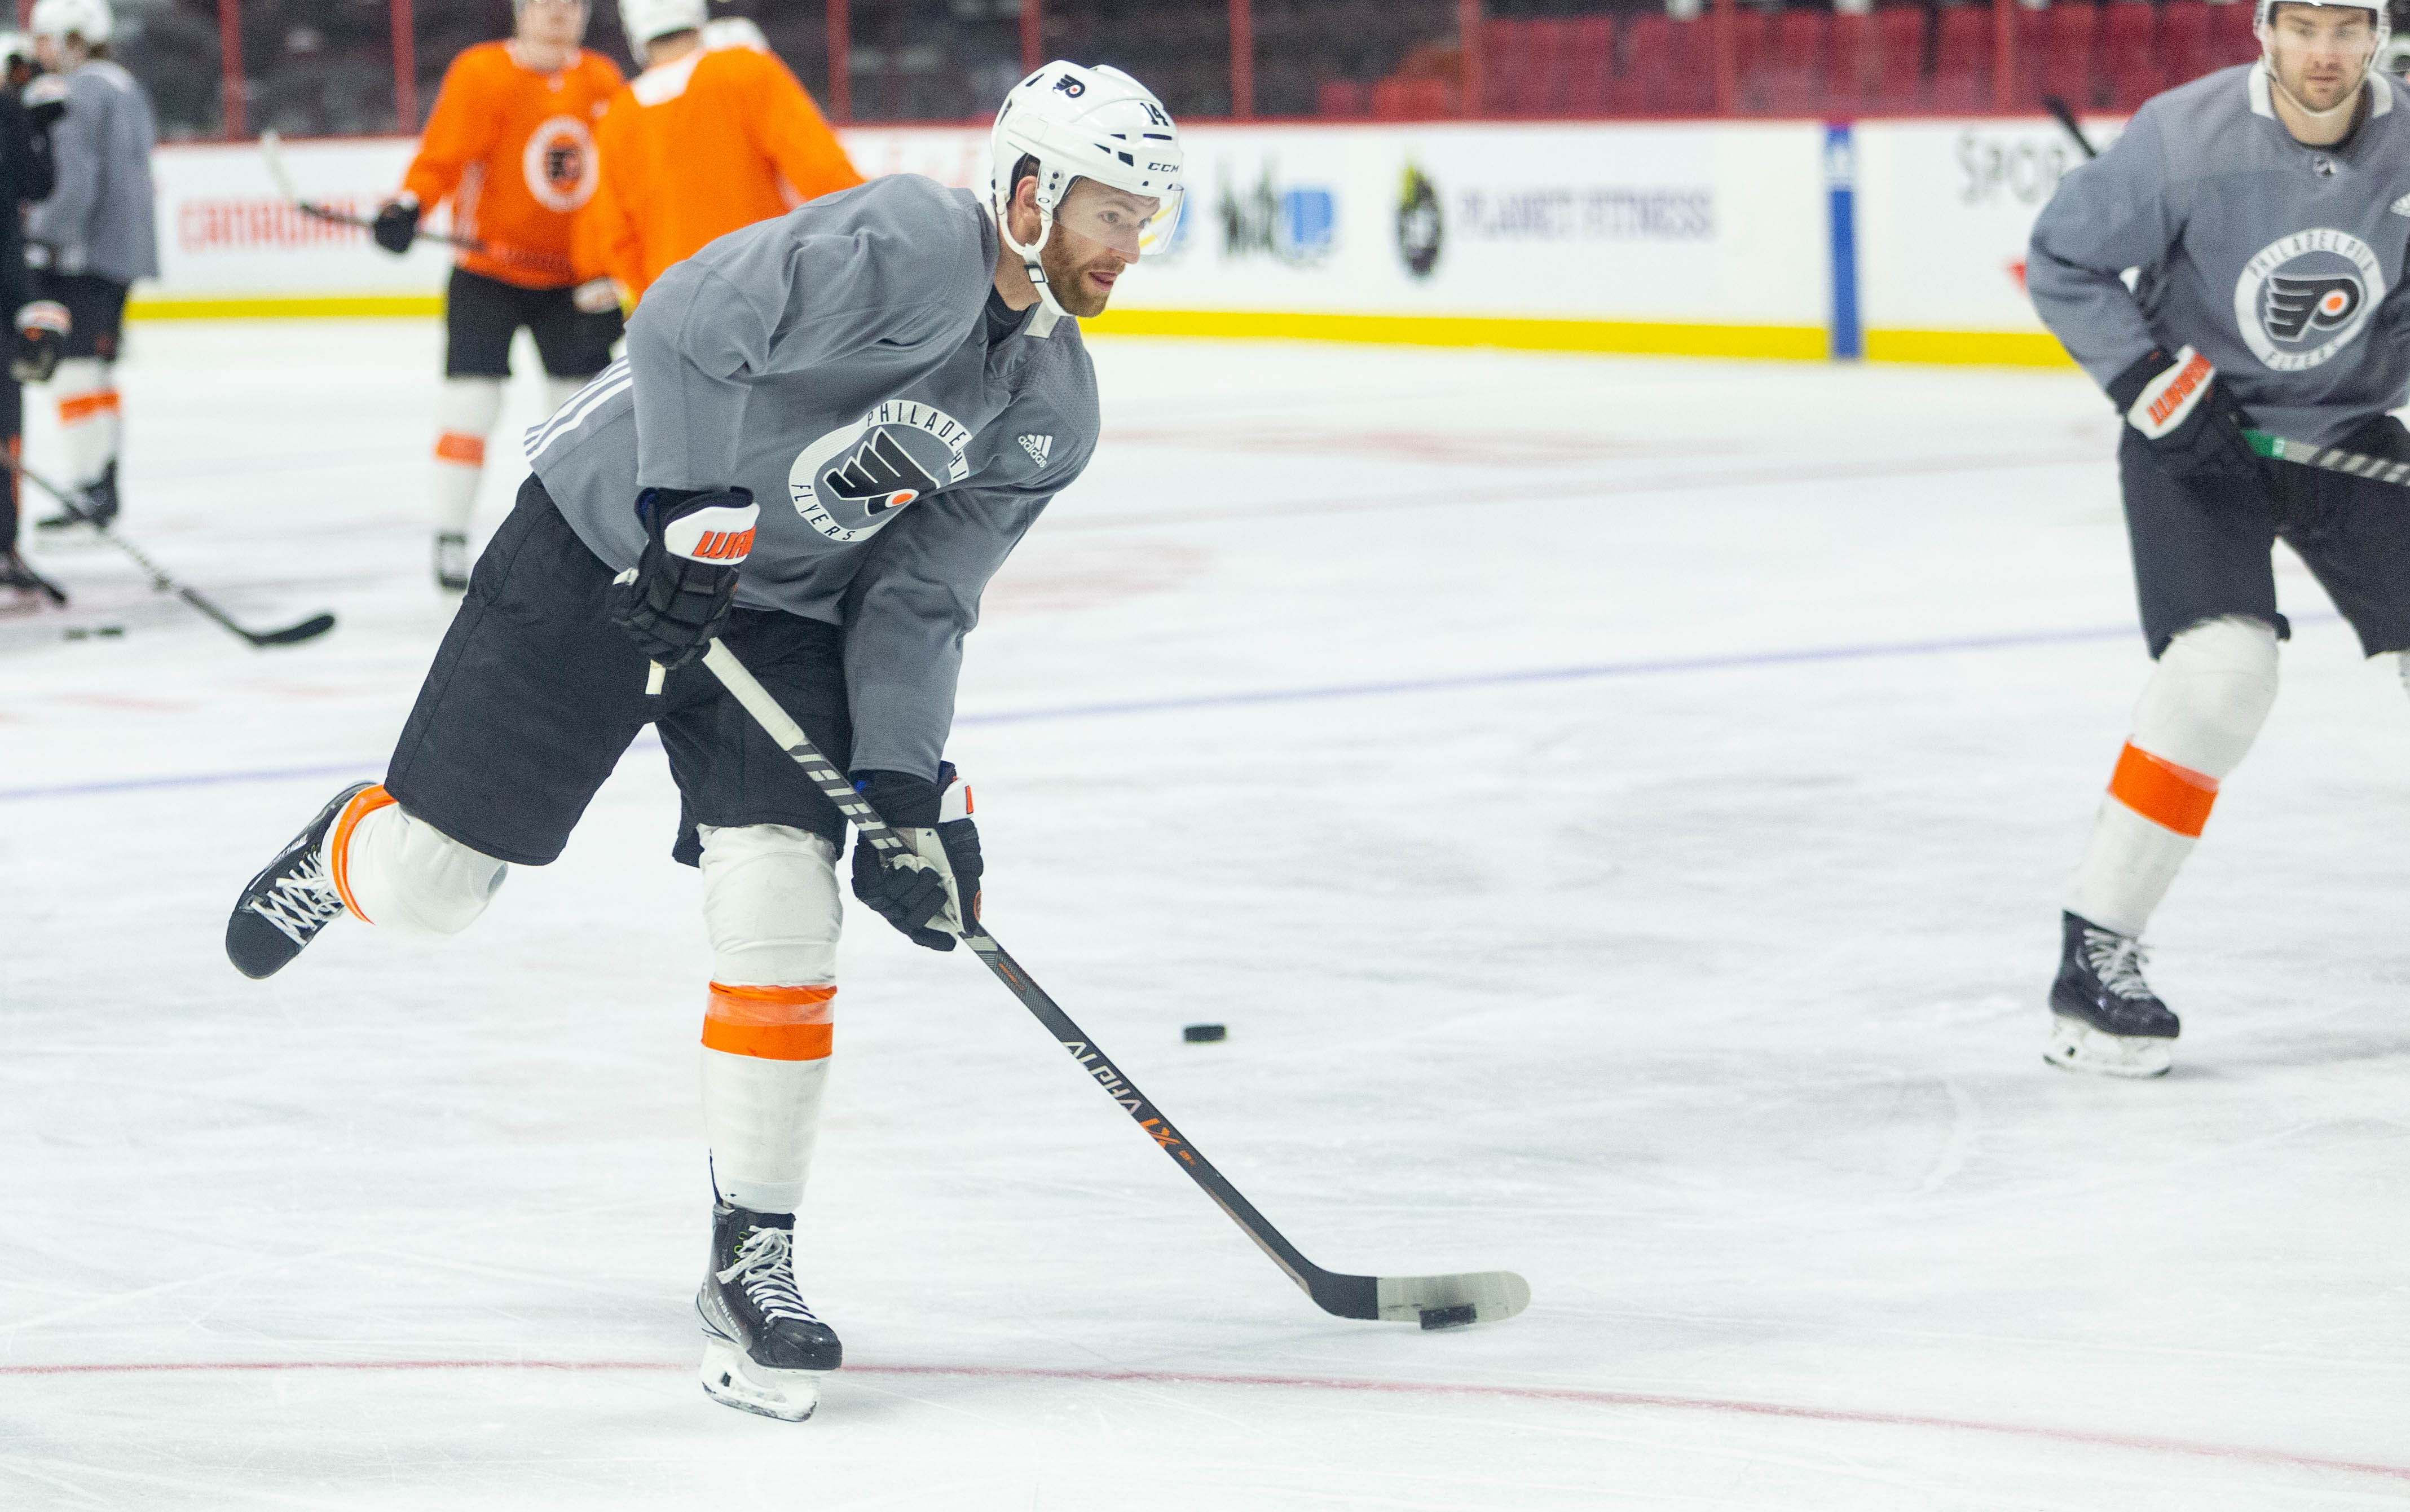 NHL Network on X: The Flyers already have some key pieces but new head  coach John Tortorella will have to bring structure and accountability to  the roster. @Jackie_Redmond, @EJHradek_NHL